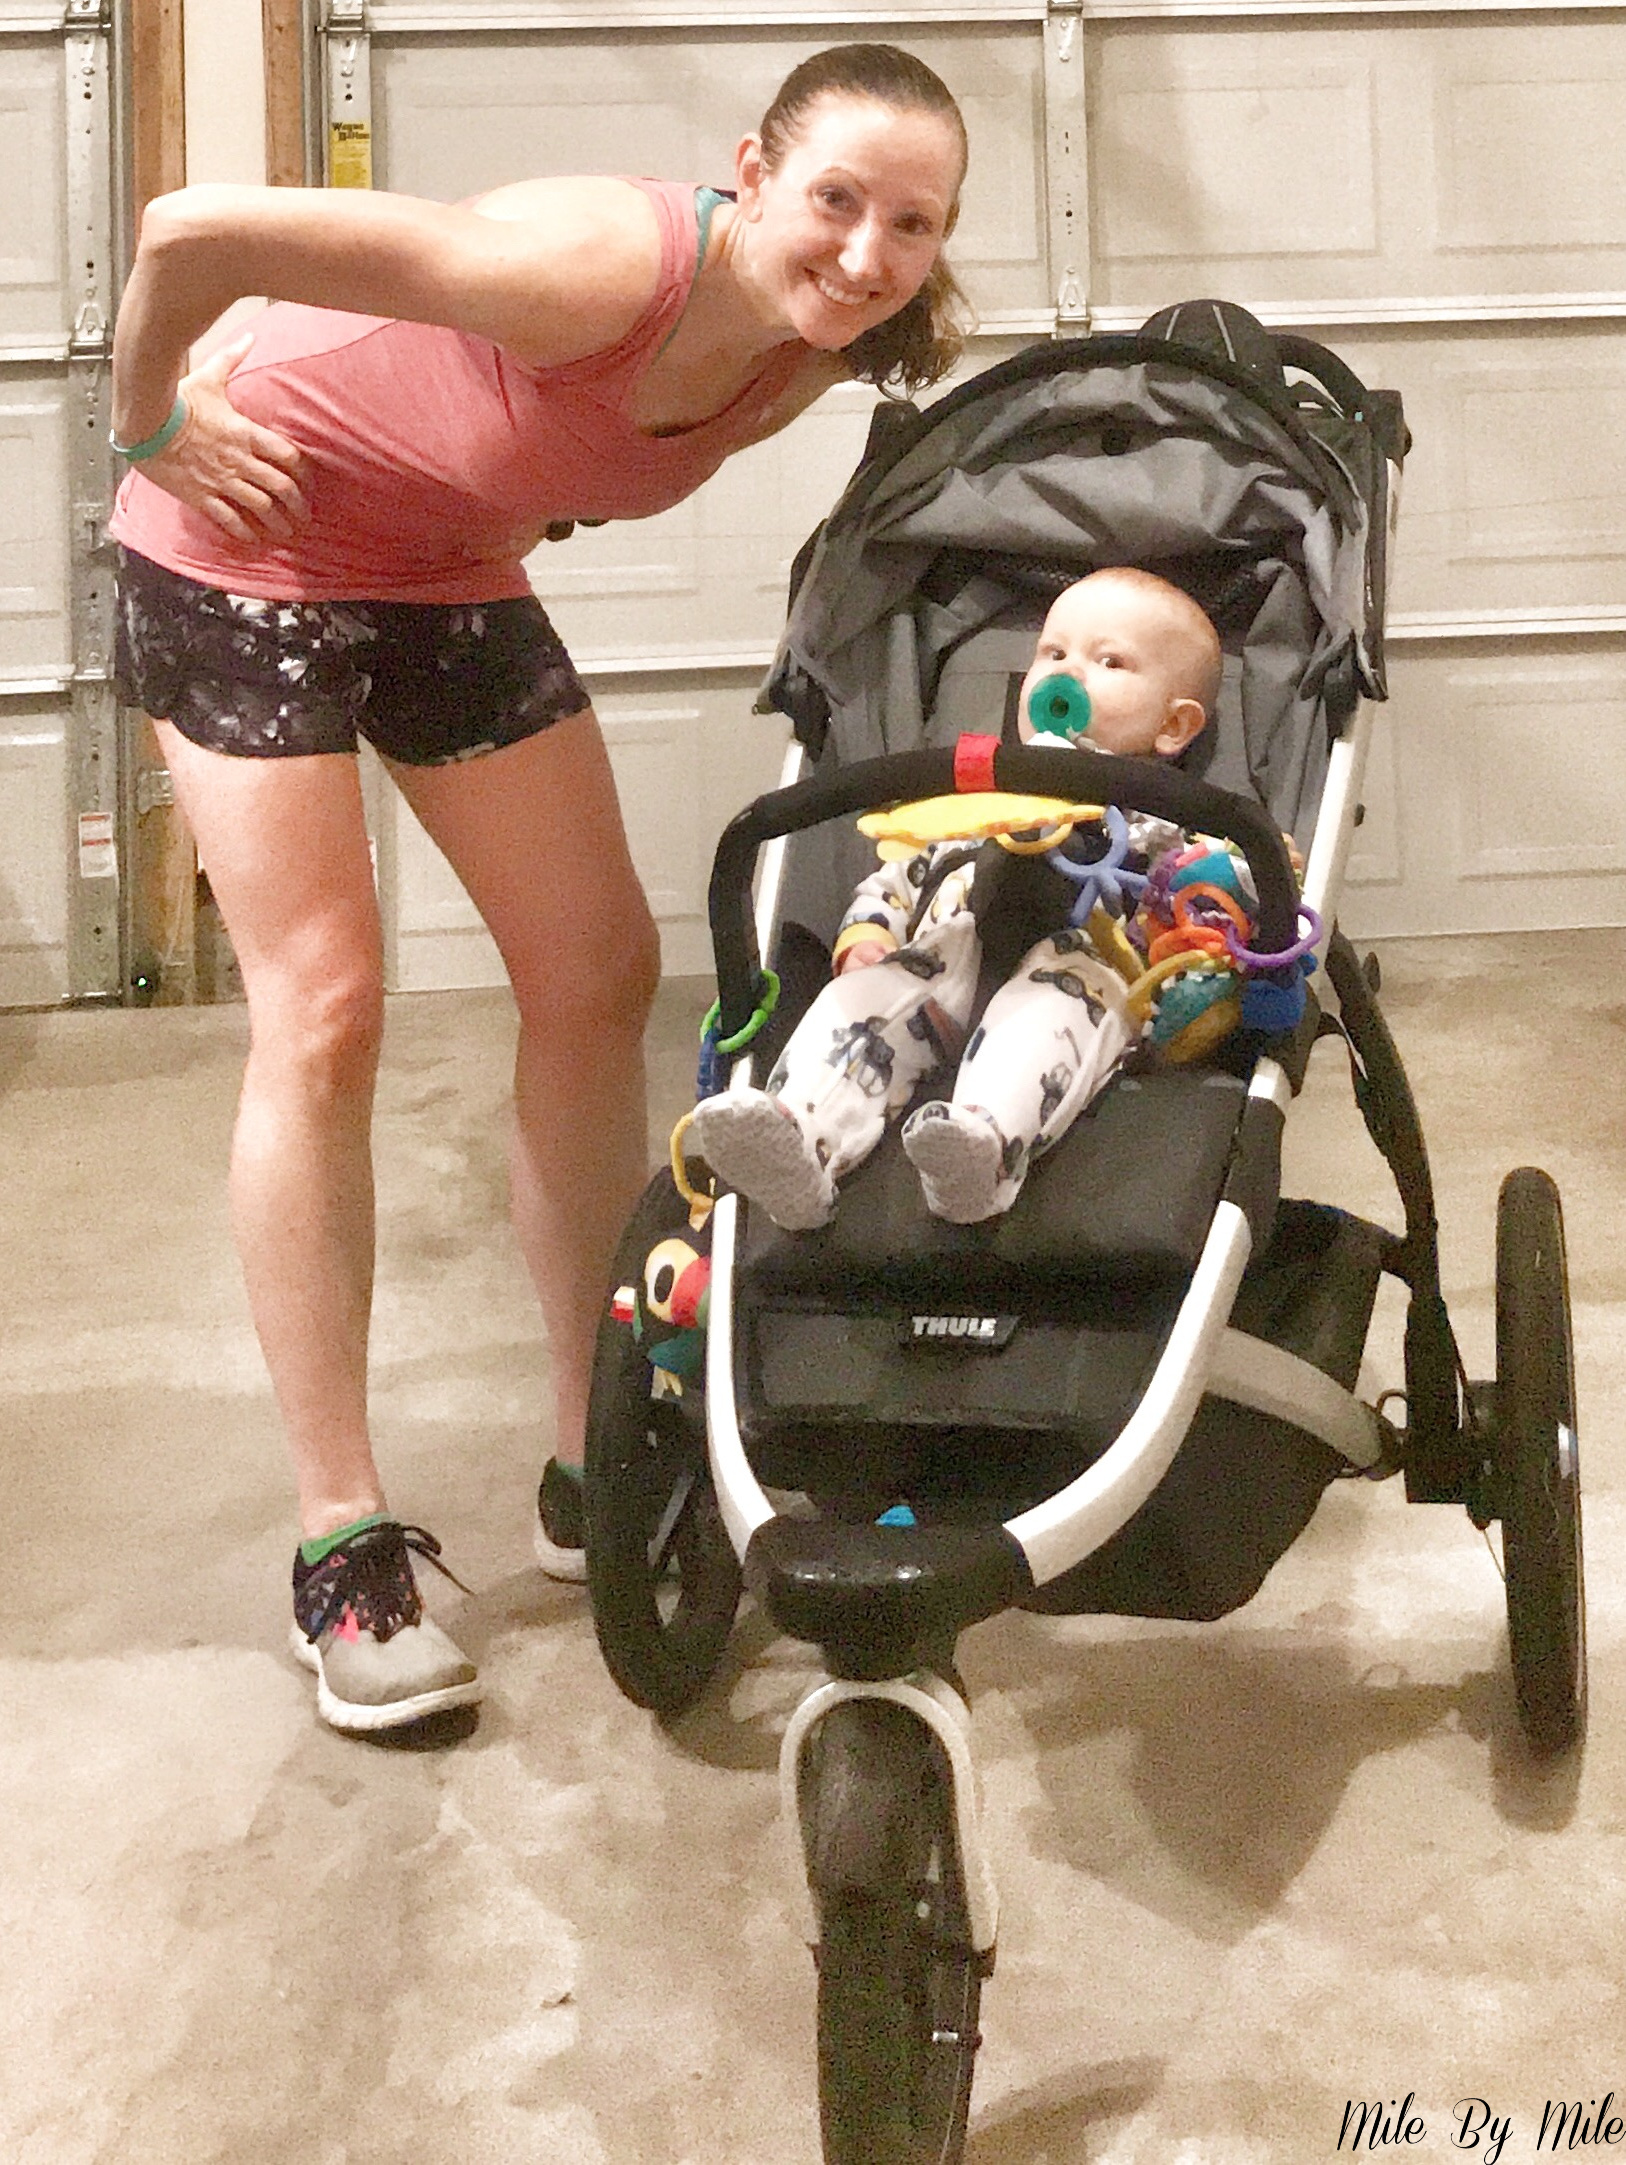 Most runners expect there to be stroller running challenges. After all you're pushing extra weight! But here are some other reasons that stroller running is more complicated than regular running! #running #strollerrunning #motherrunner